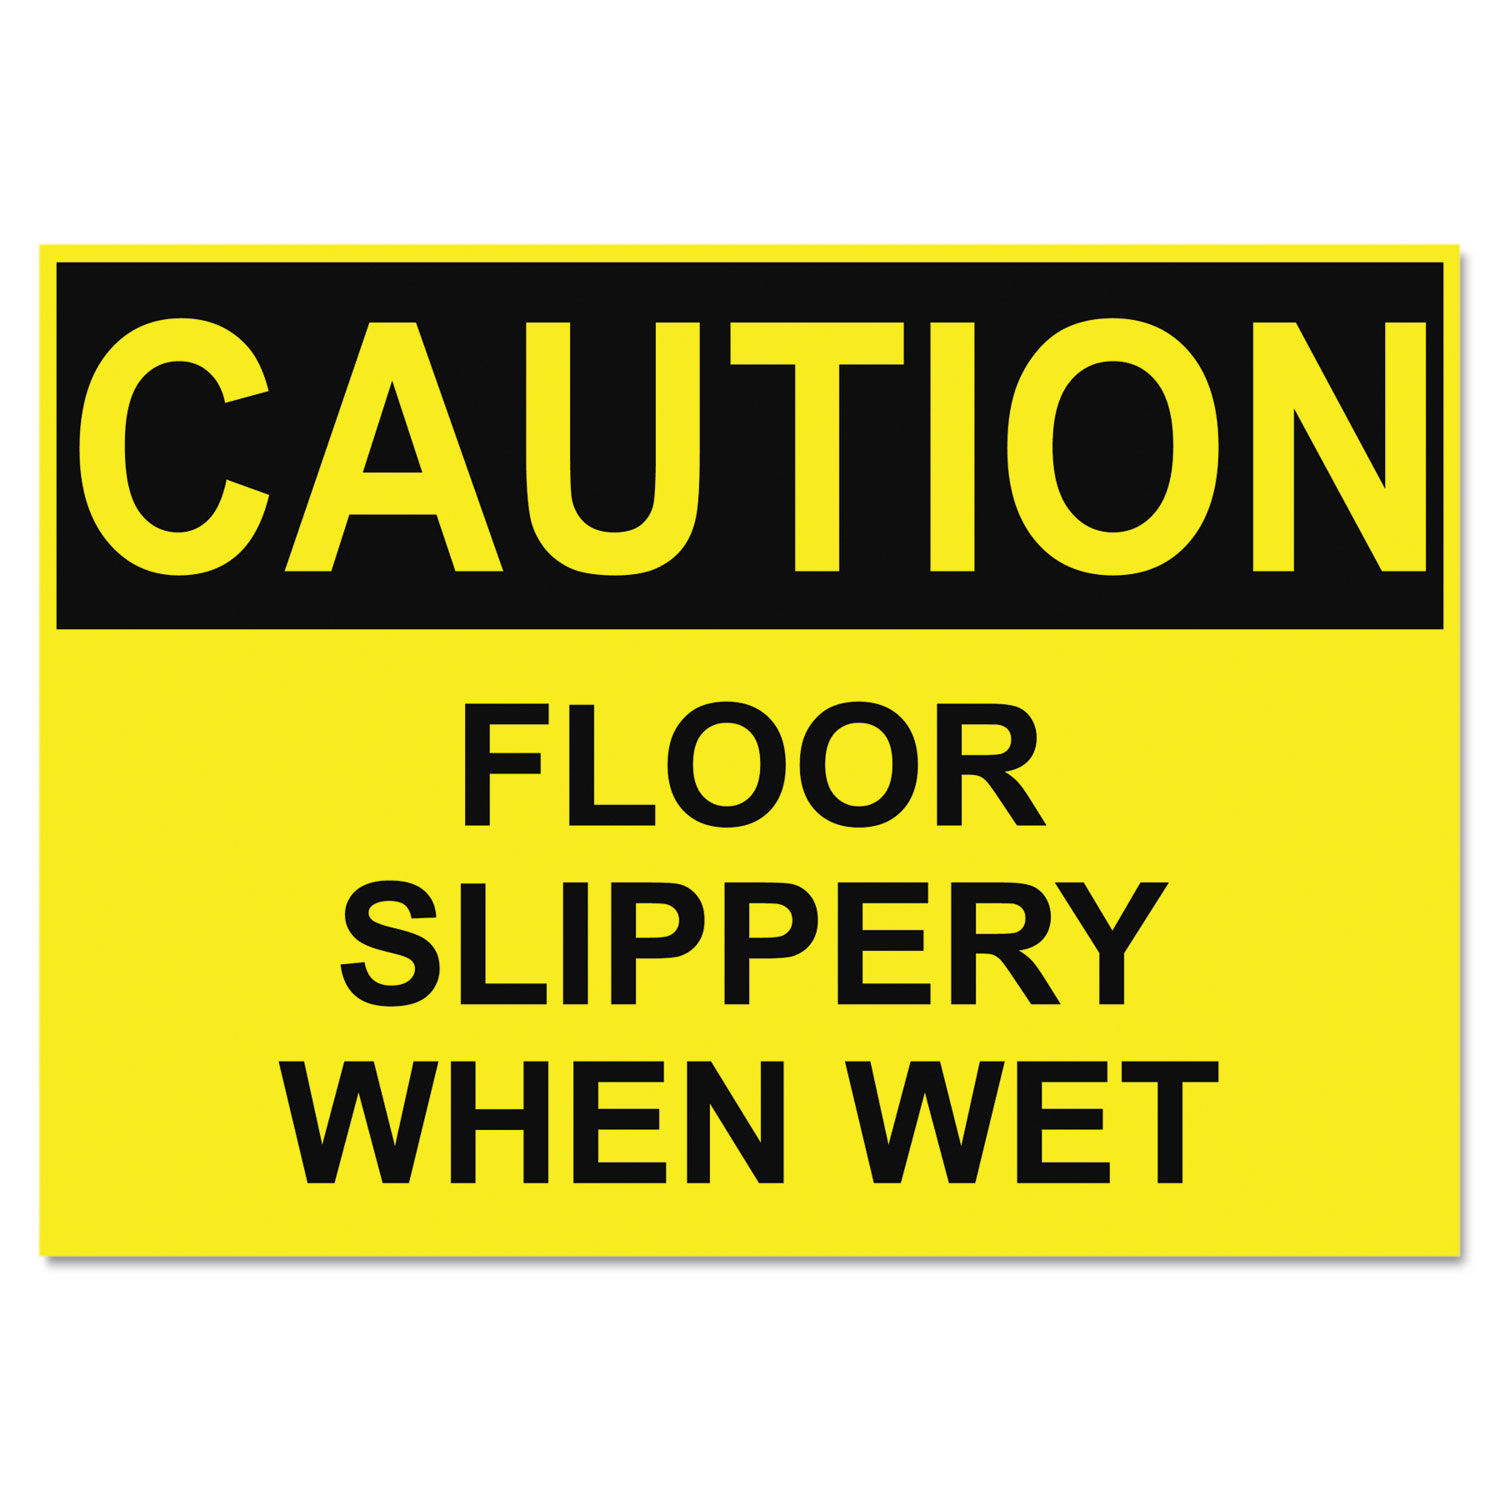 OSHA Safety Signs CAUTION SLIPPERY WHEN WET, Yellow/Black, 10 x 14